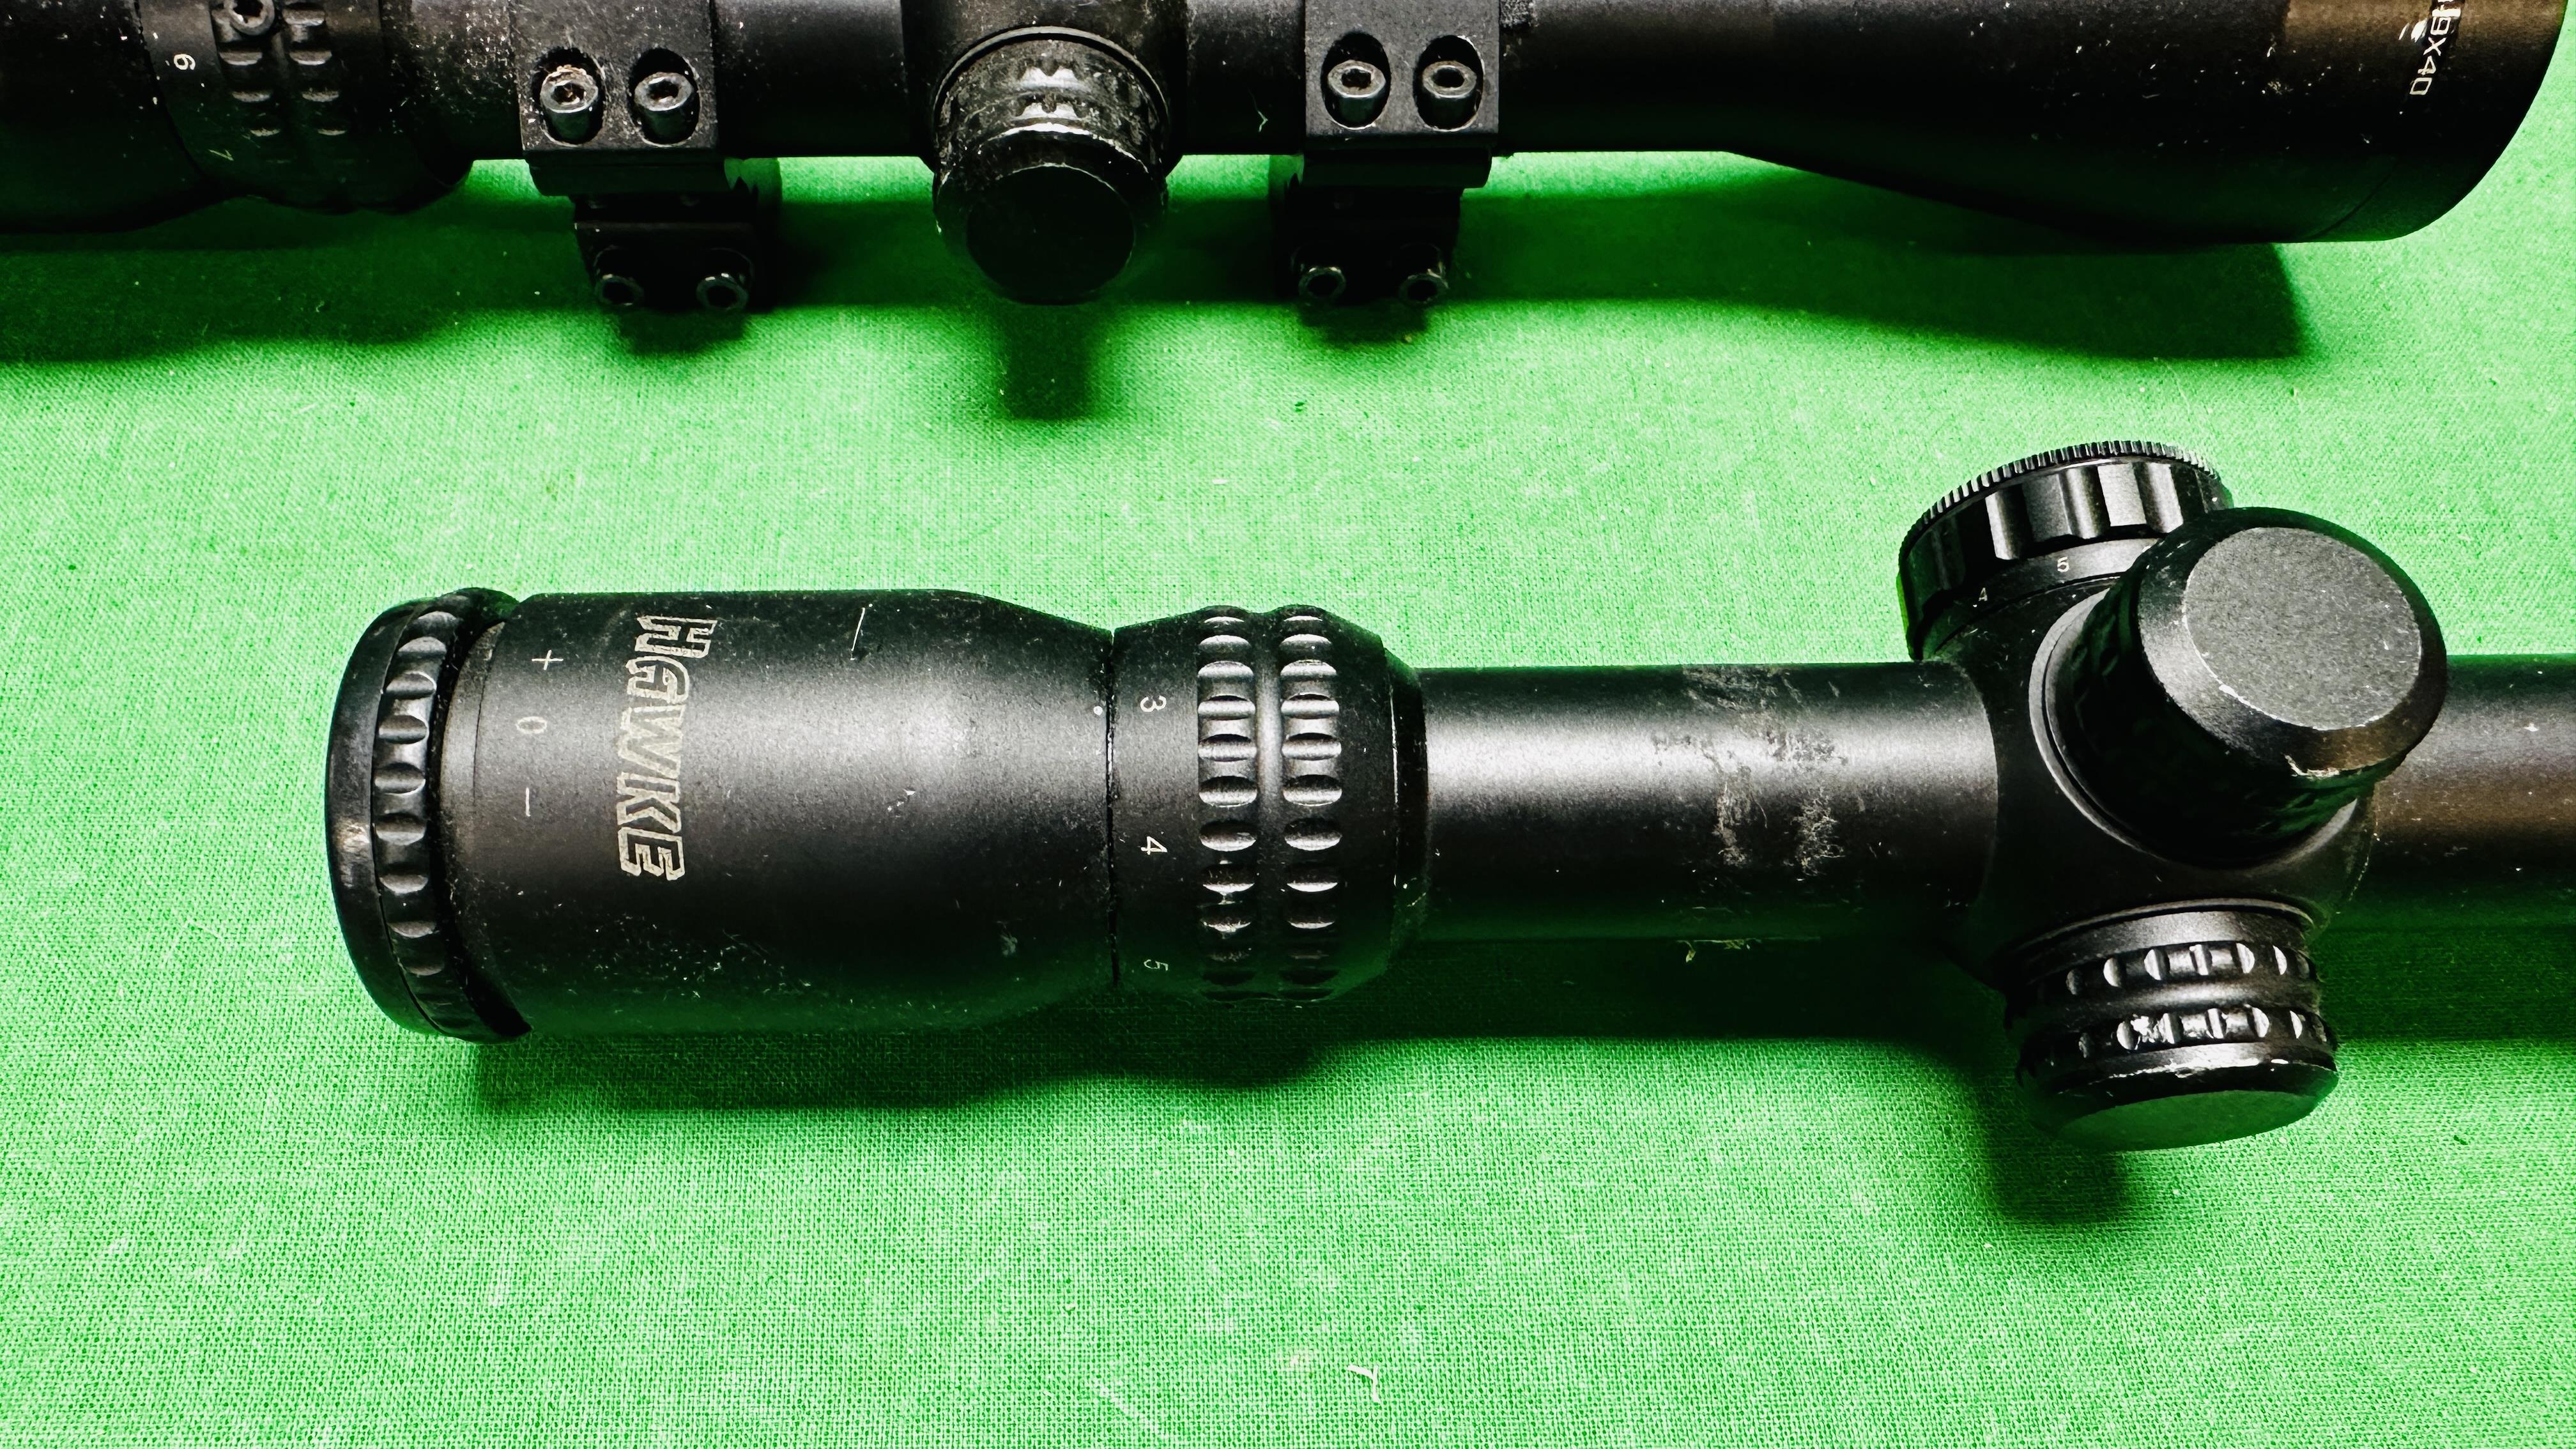 TWO HAWKE RIFLE SCOPES TO INCLUDE SPORT HD 3-9X40 WITH MOUNTS AND SPORT HD 3-9X50 AO MILL DOT IR. - Image 2 of 8